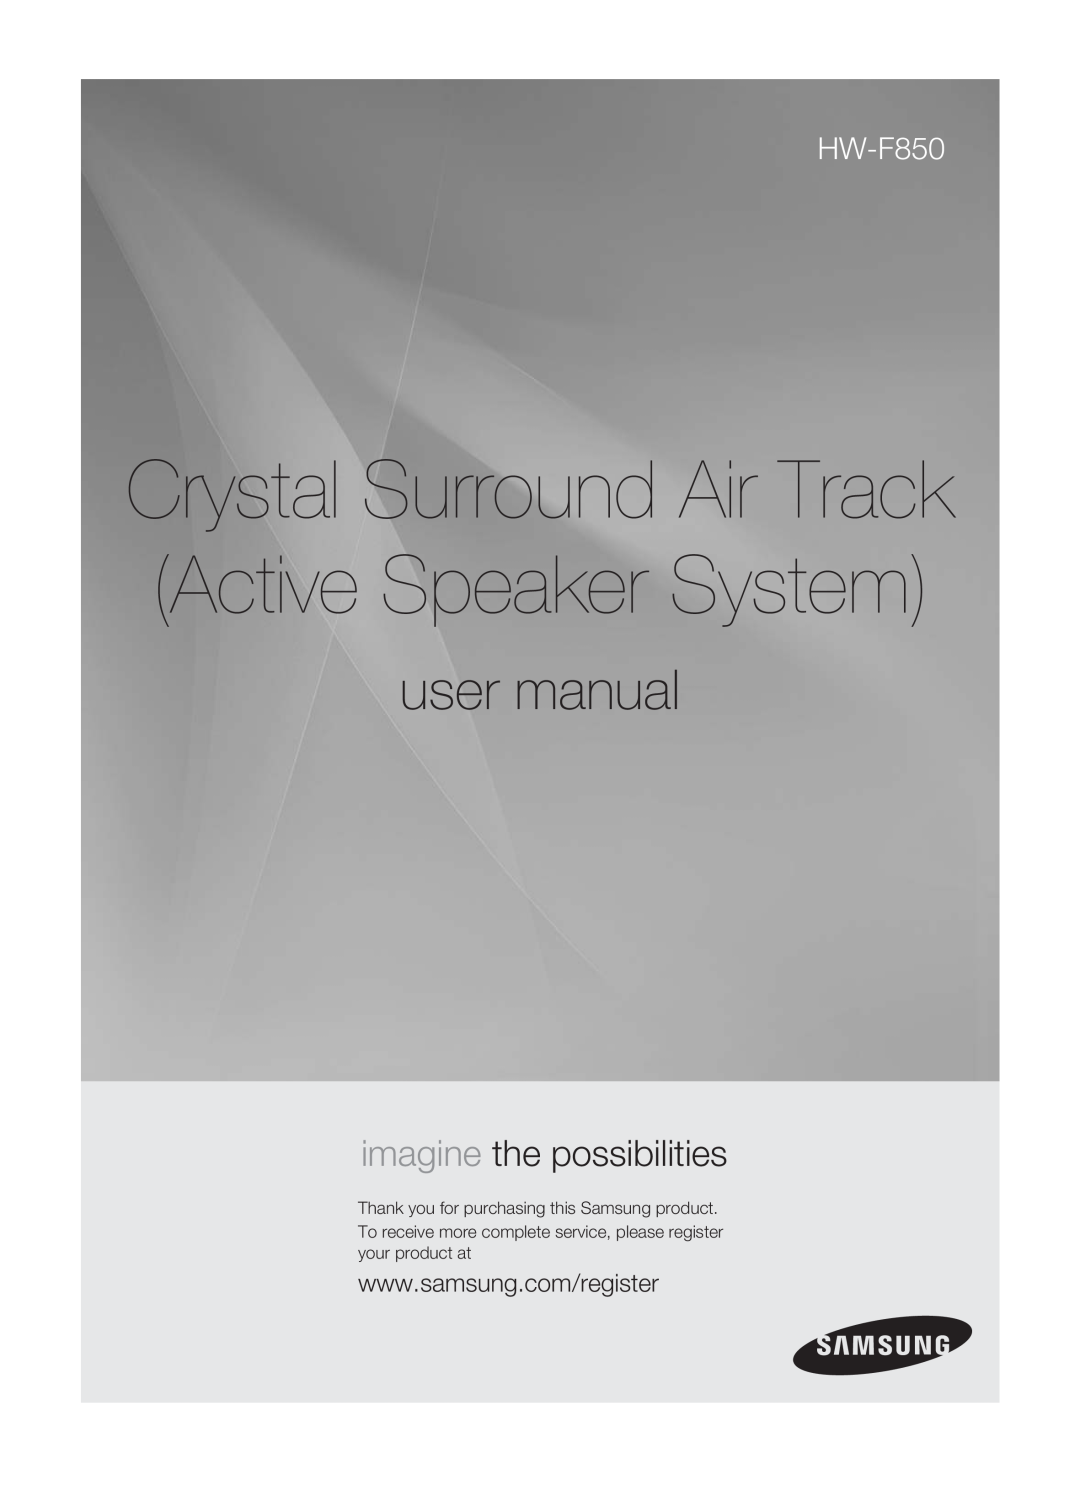 Samsung HW-F850/ZA user manual Crystal Surround Air Track Active Speaker System, imagine the possibilities 